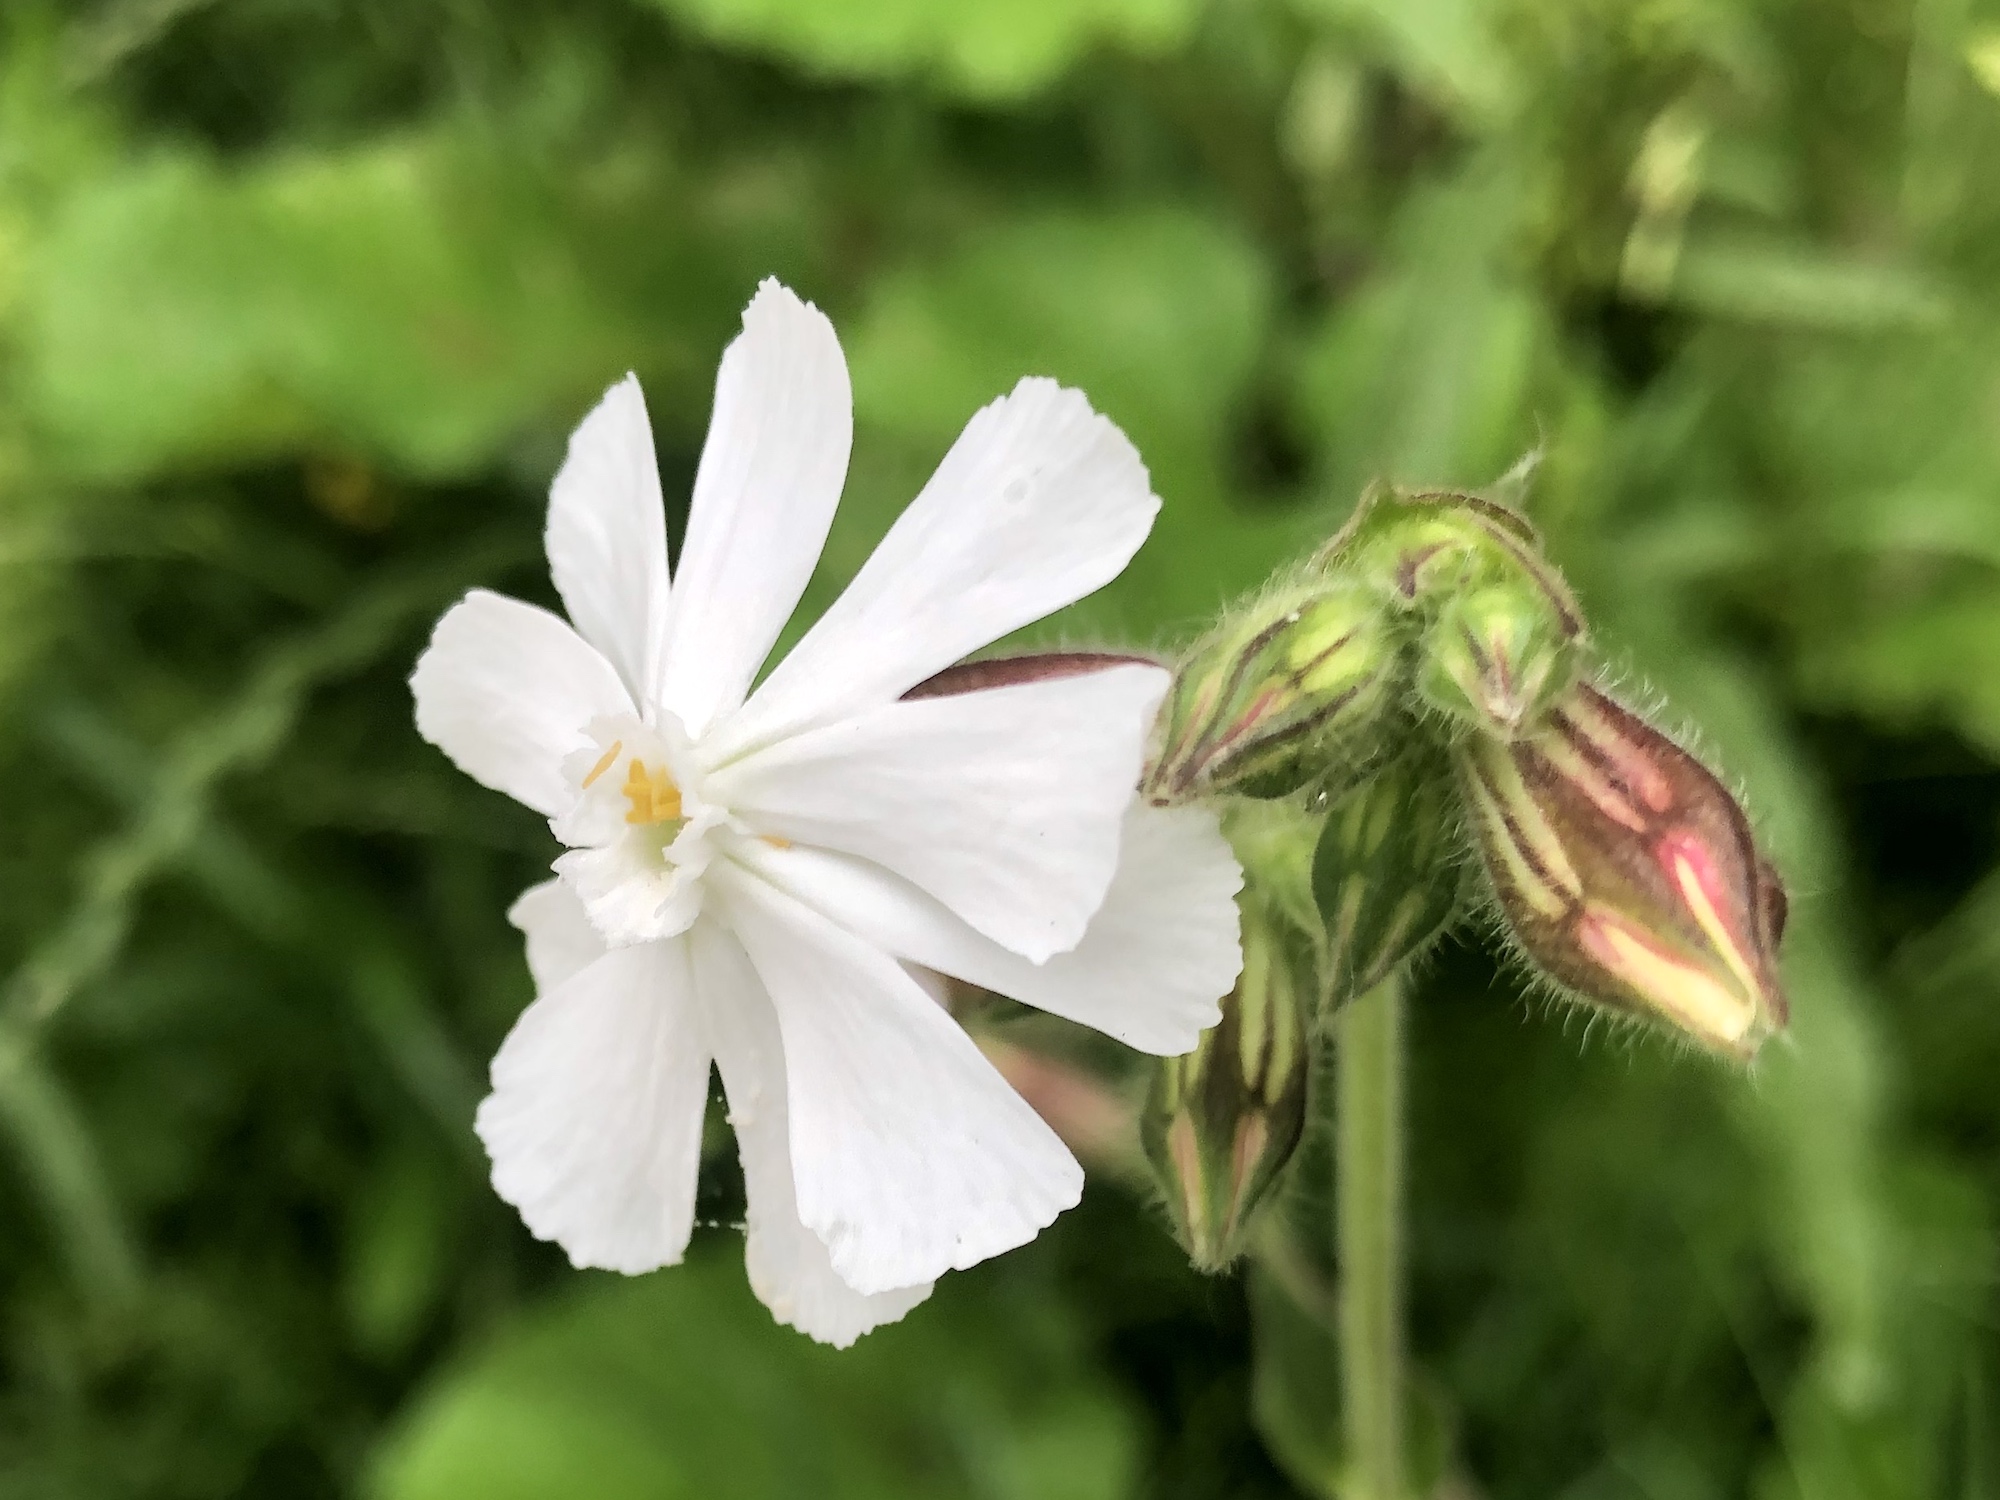 White Campion by Marion Dunn Pond on June 24, 2019.